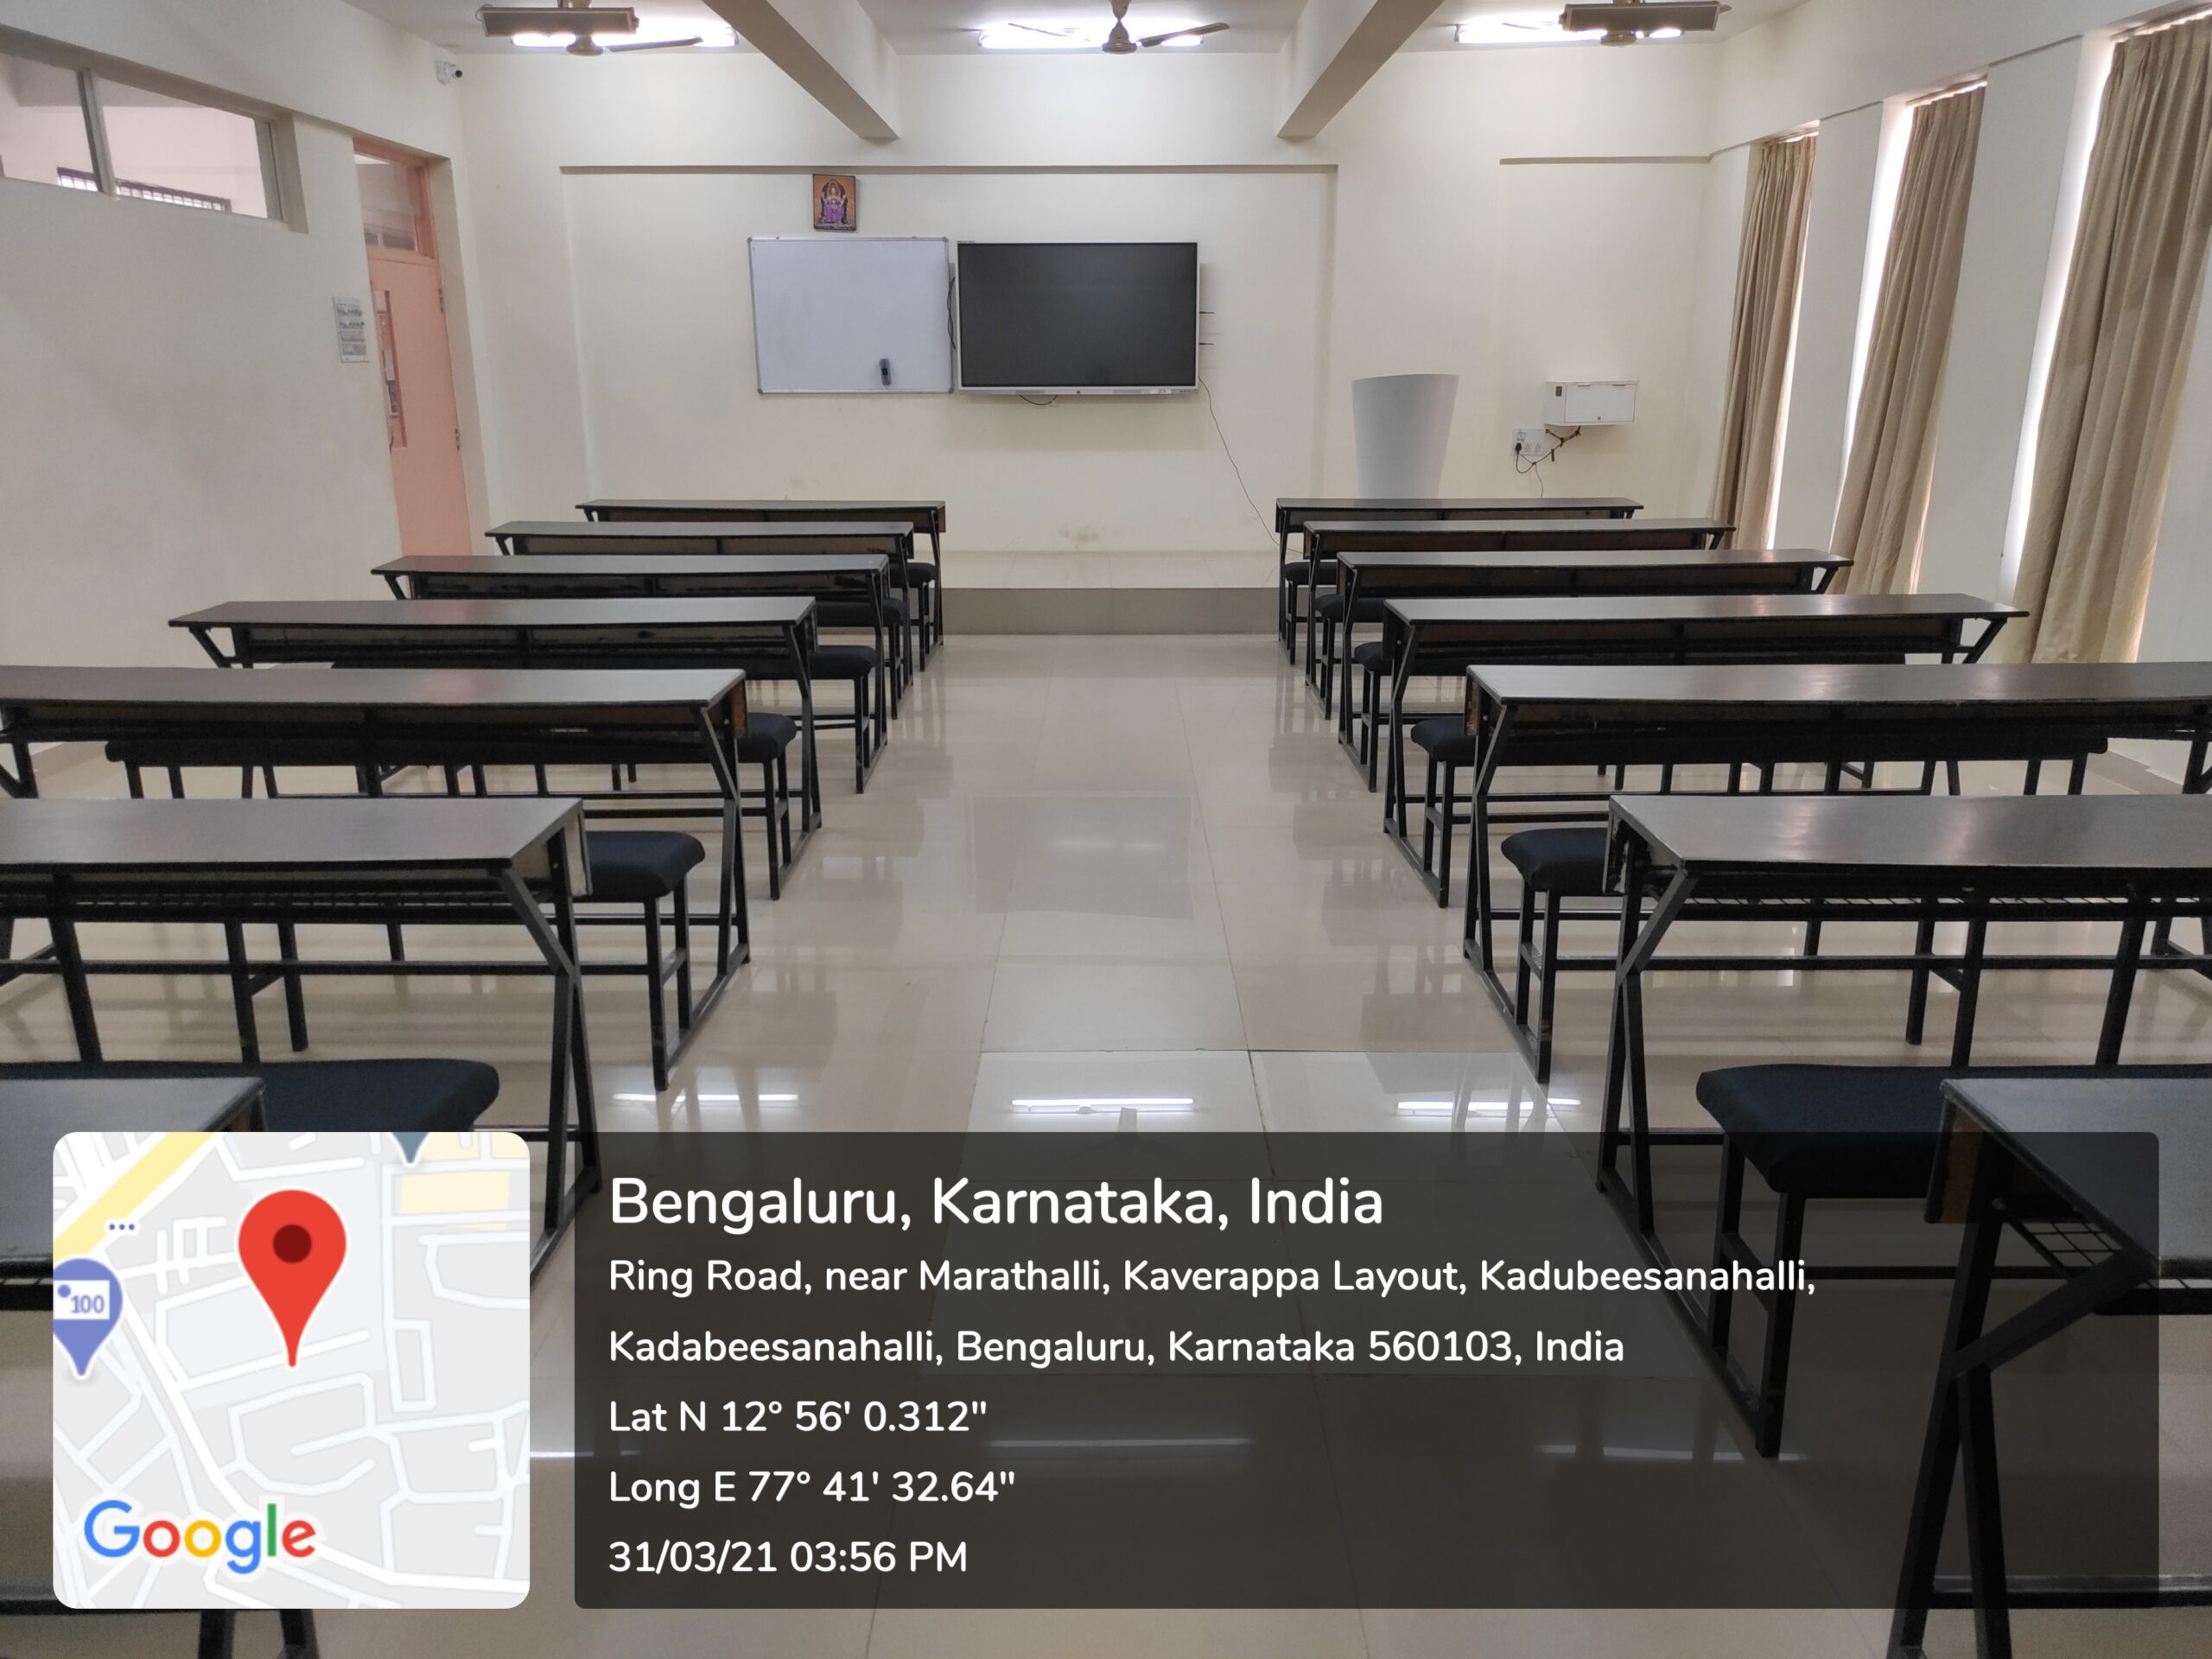 Lecture Halls- Infrastructure- Top 10 Engineering Colleges in India